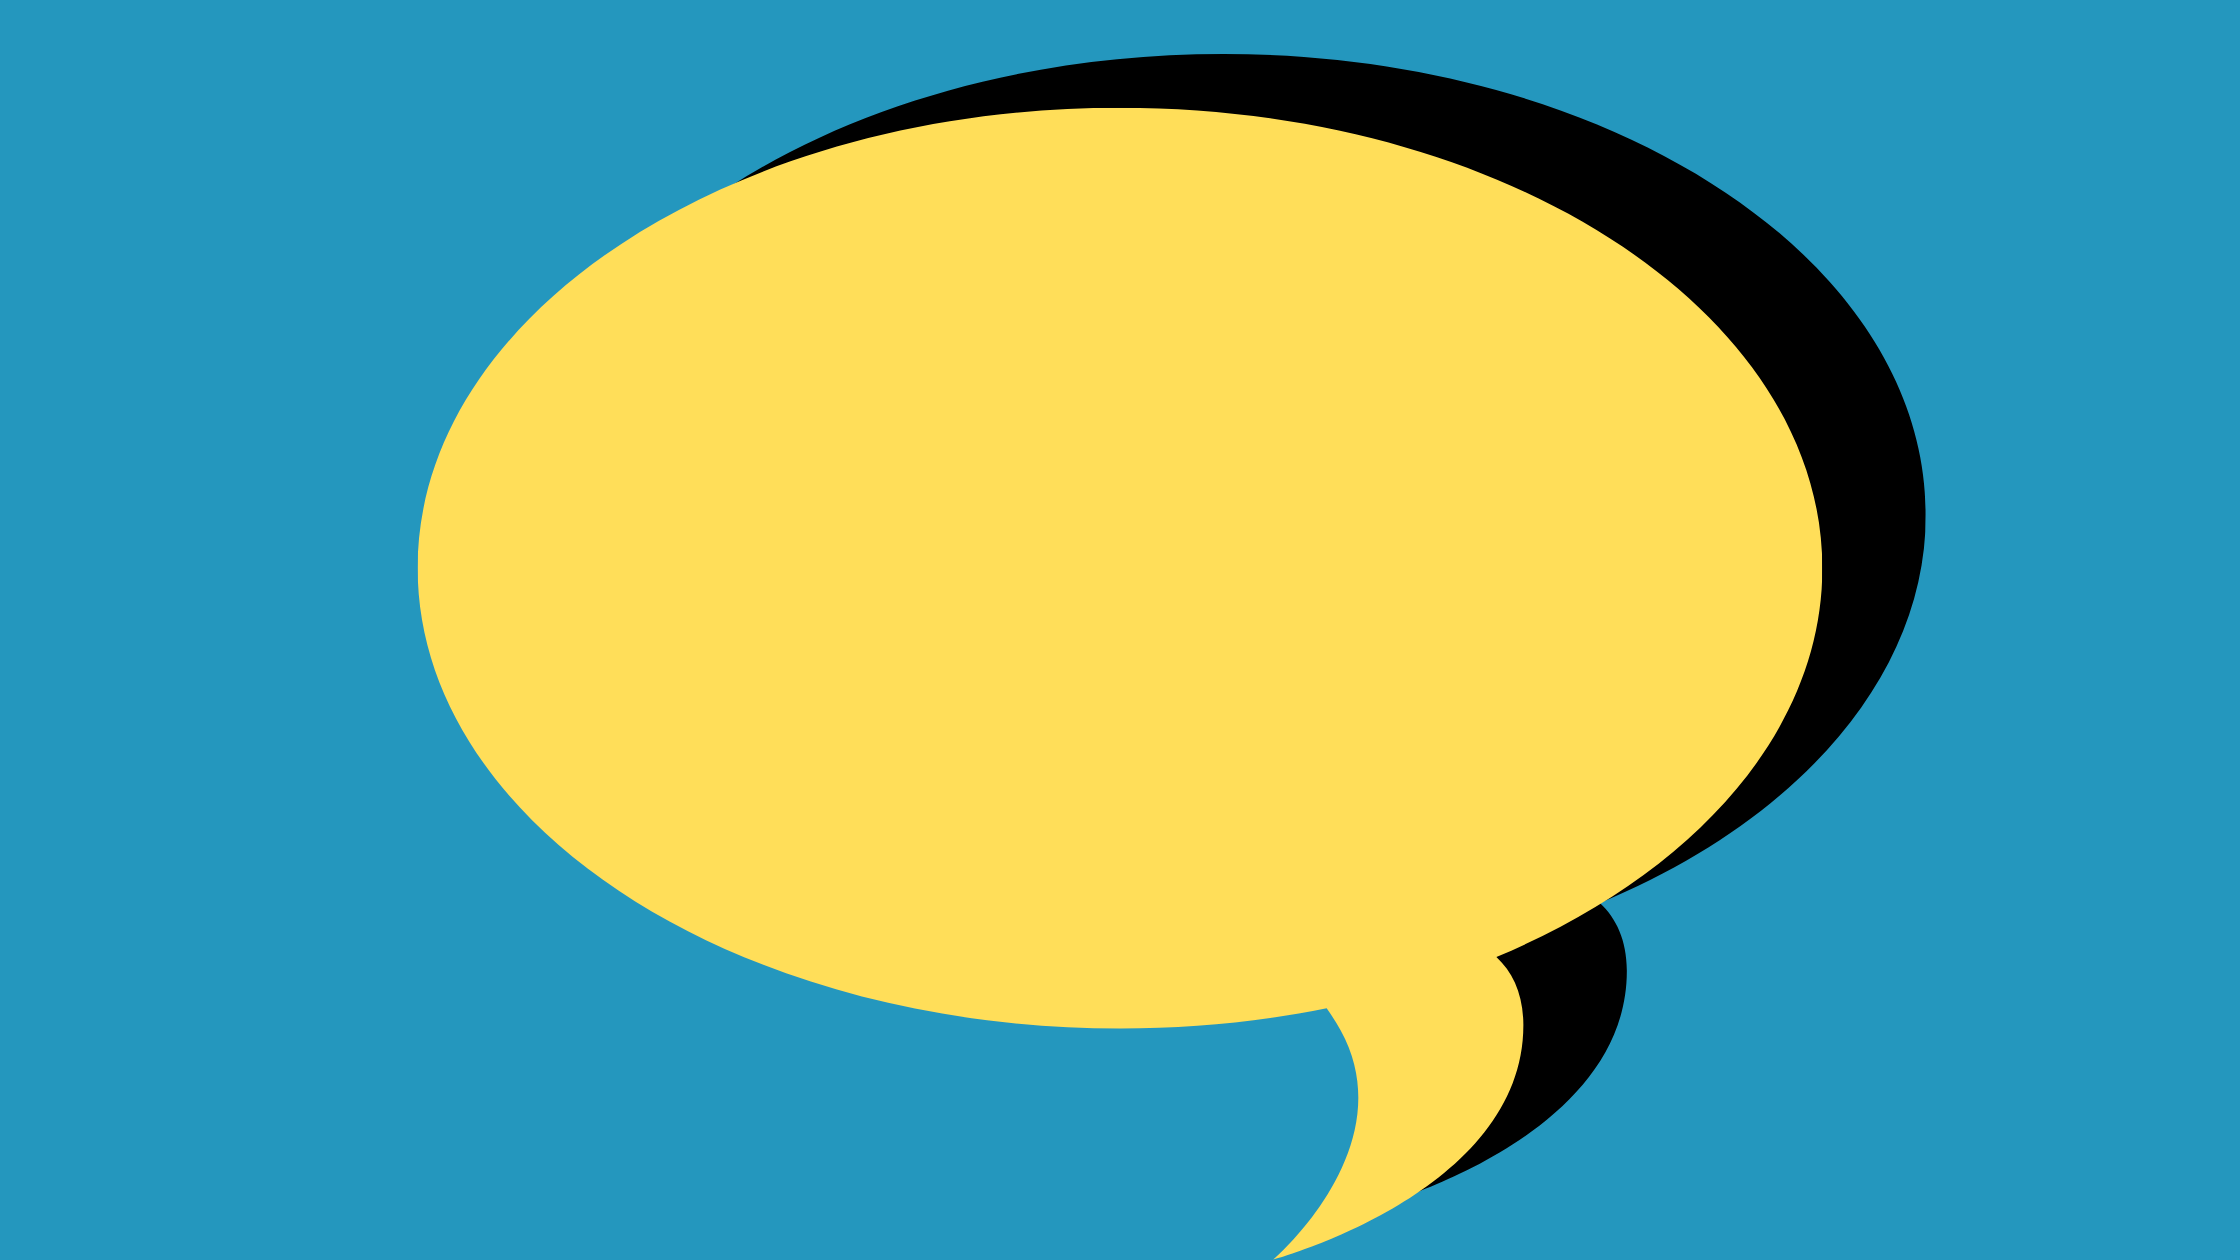 A graphic of a speech bubble with a 3D effect